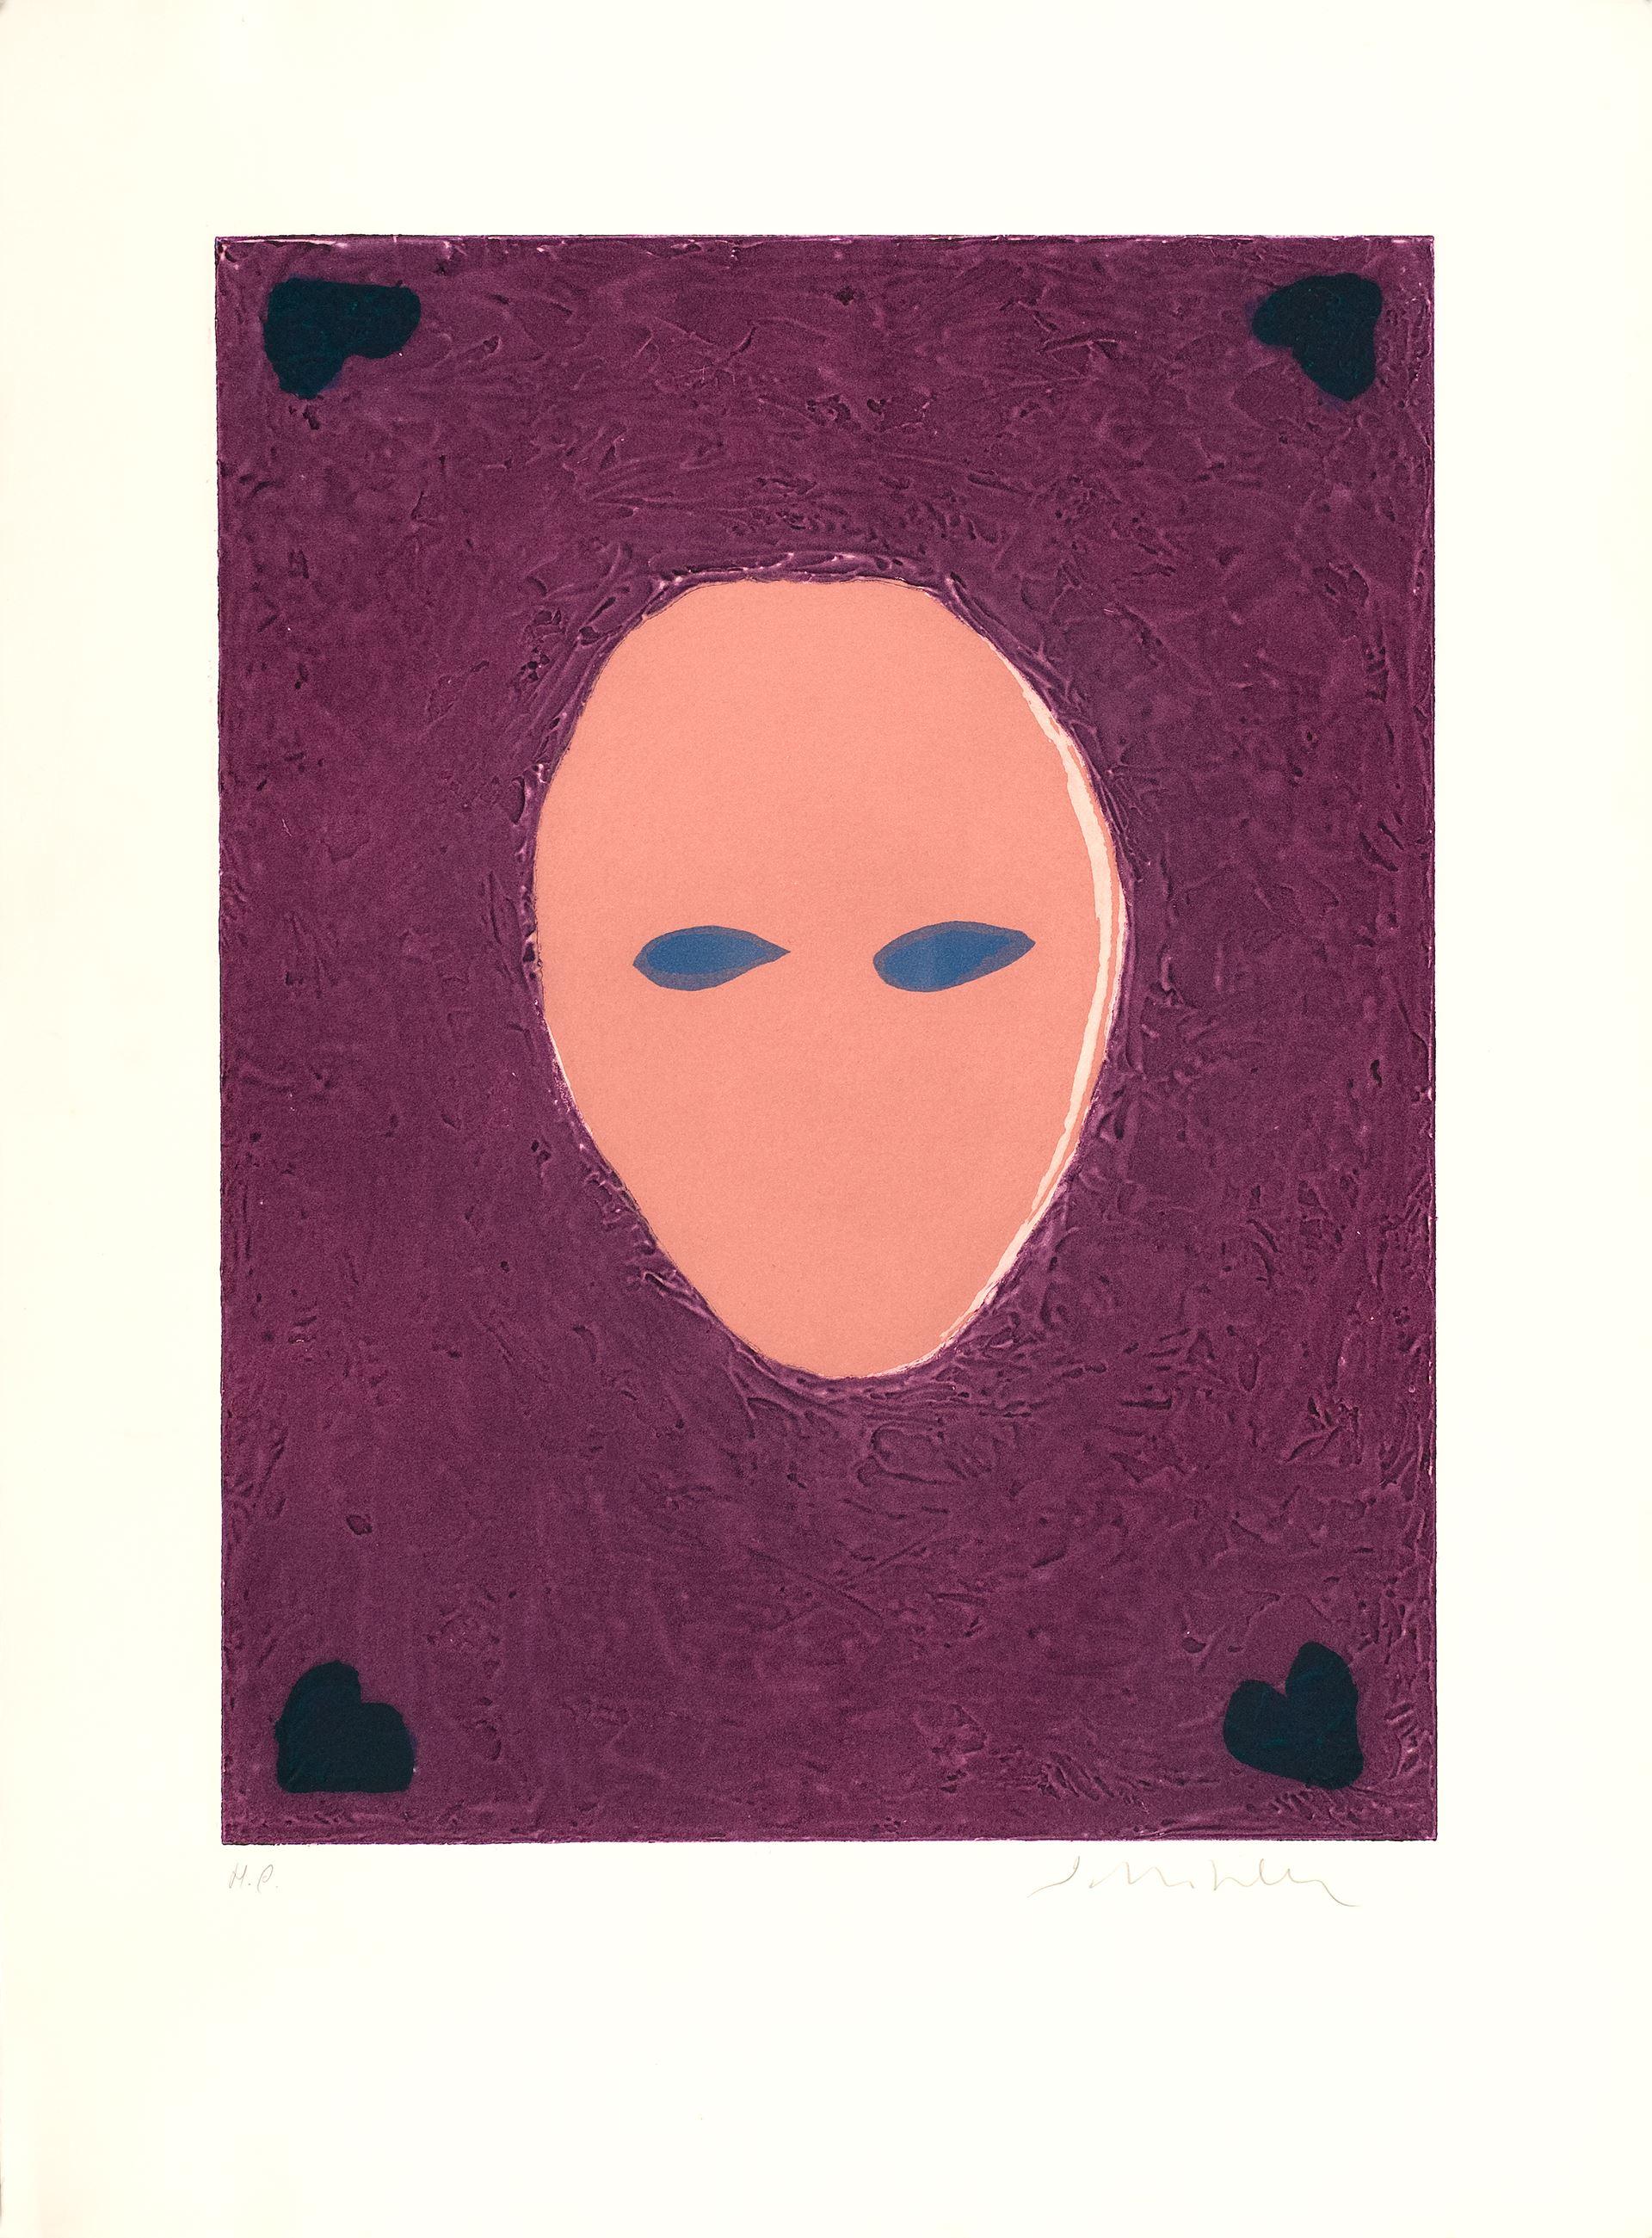 Fritz Scholder (United States, 1937-2005)
'Mask of a mystery woman', 1982
engraving on paper
30 x 22.1 in. (76 x 56 cm.)
ID: SCH1341-002-000
Unframed